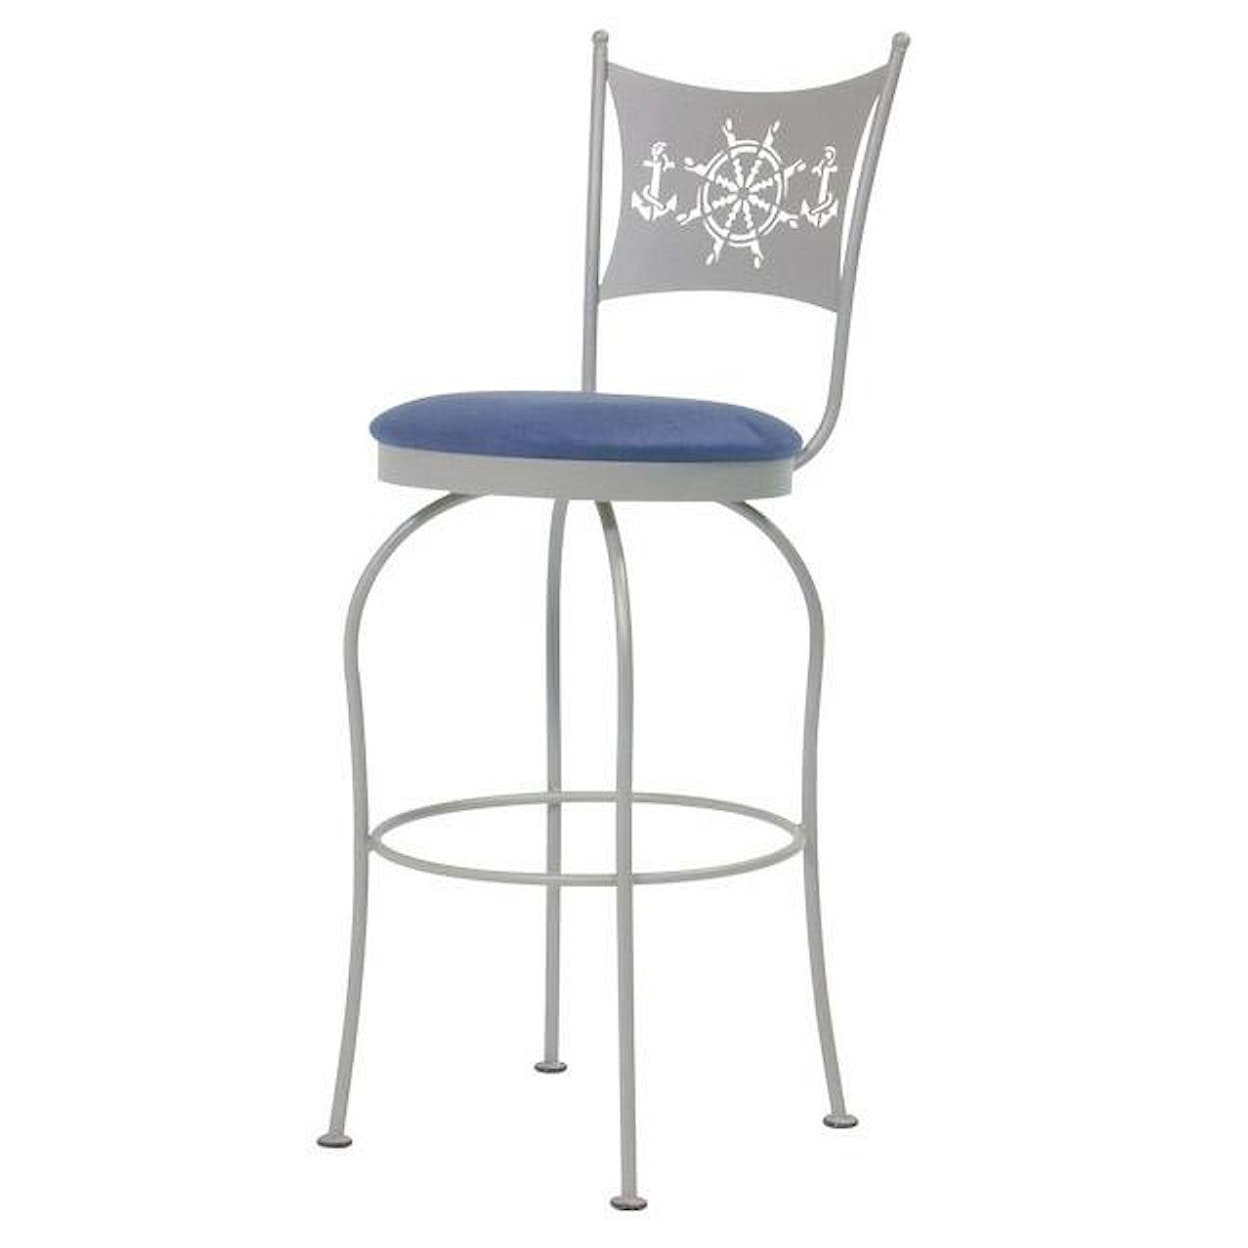 Trica Transitional Bar Stools Art Collection I Bar Stool